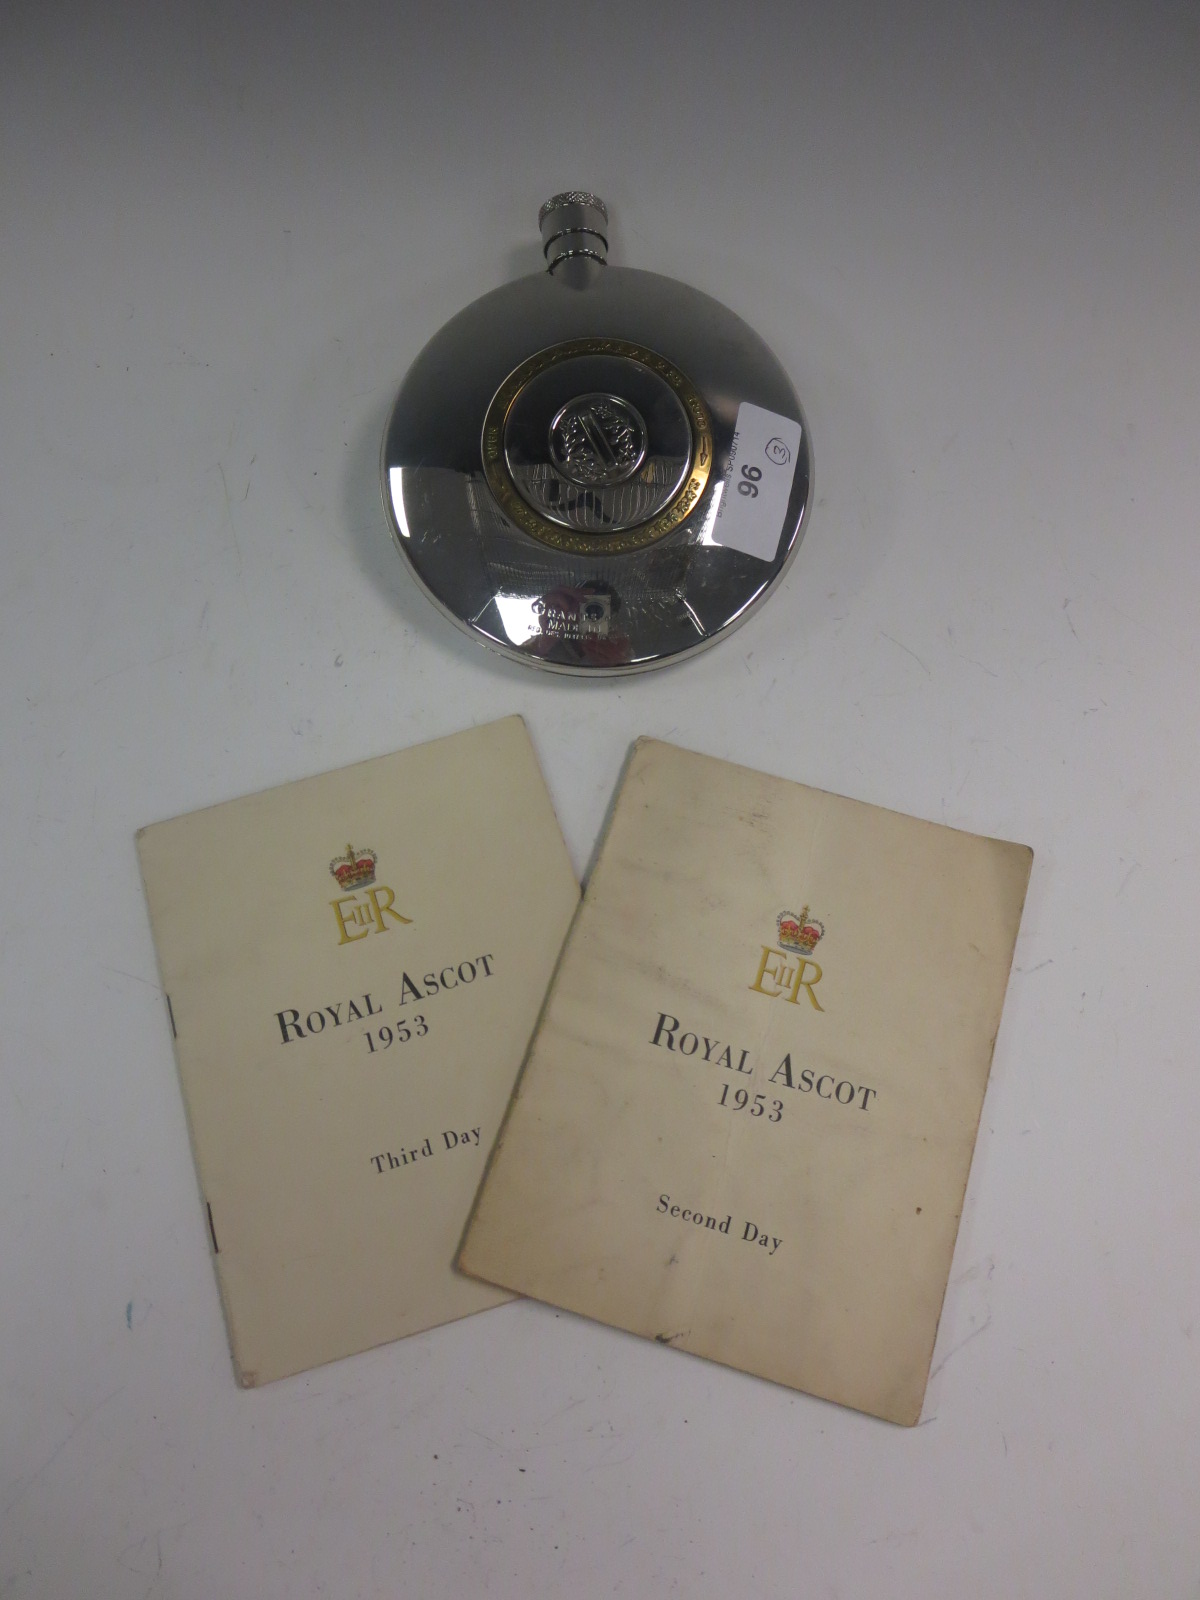 Two 1953 Royal Ascot Racing Cards, 2nd and 3rd days, and a Grants and Dalvey Hip Flask with